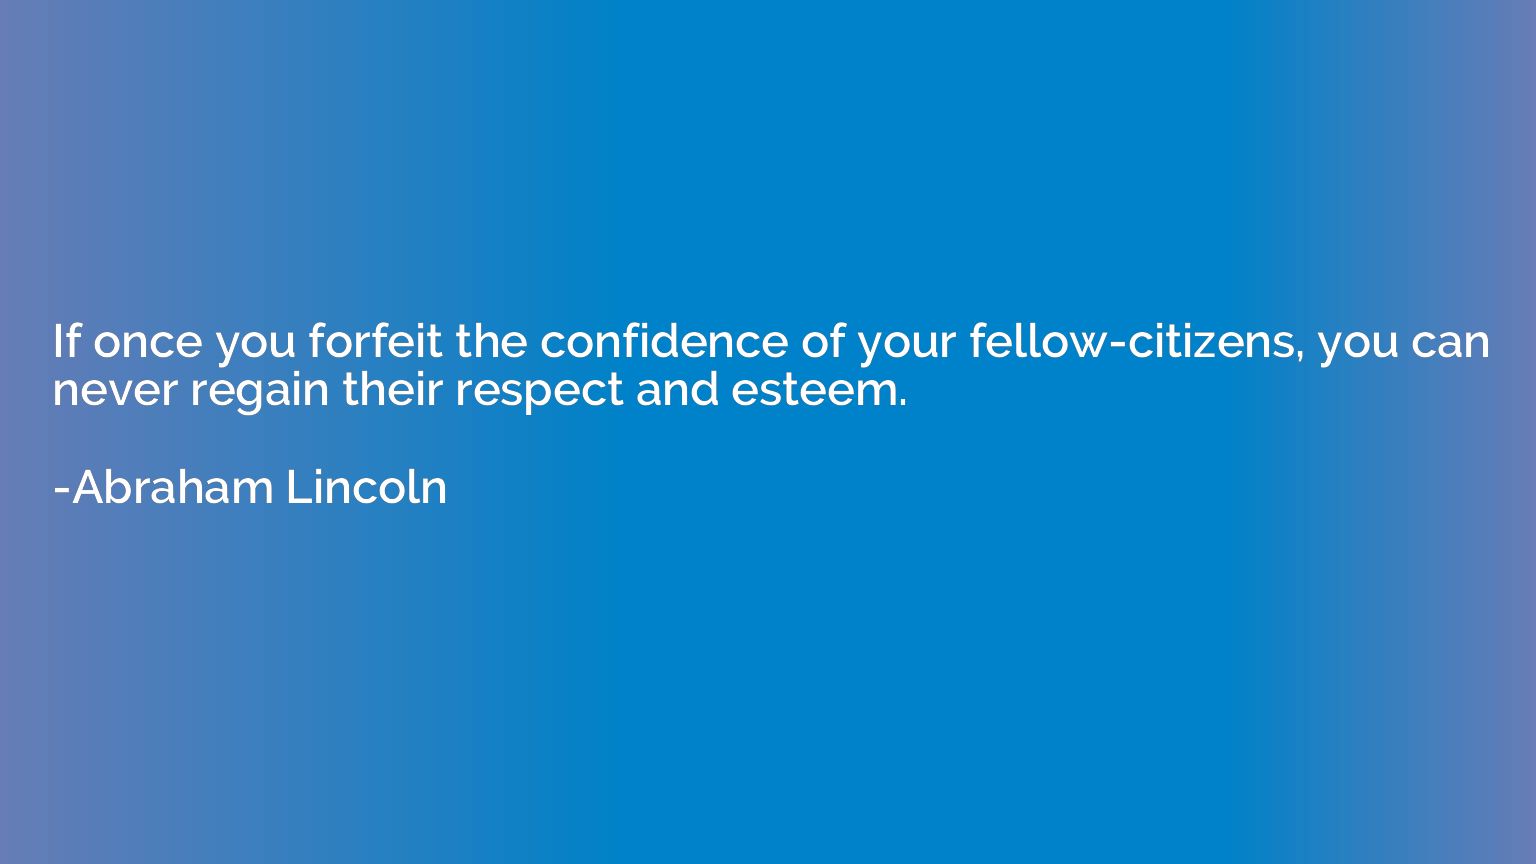 If once you forfeit the confidence of your fellow-citizens, 